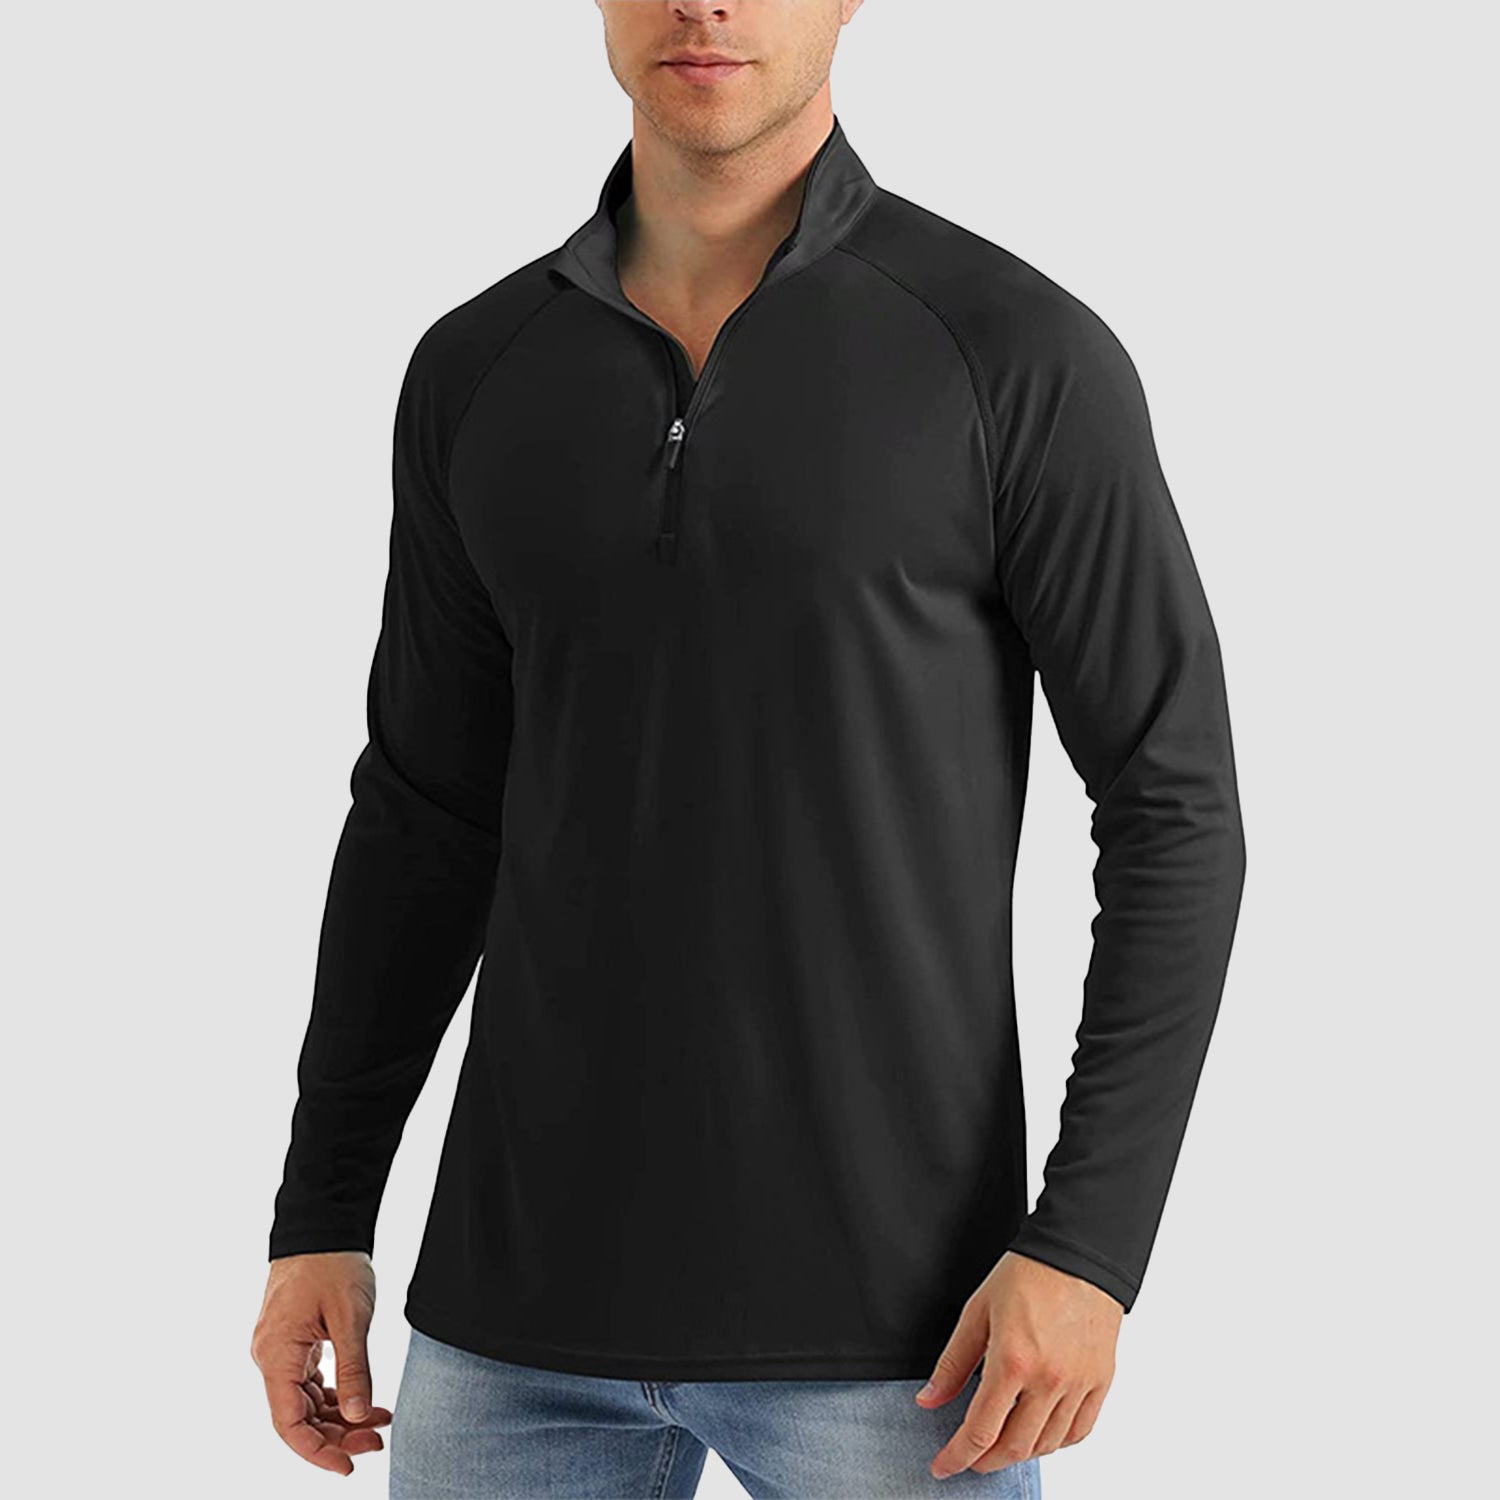 Men's Long Sleeve Shirt UPF 50 Quick Dry for Outdoor Sports, Black / M